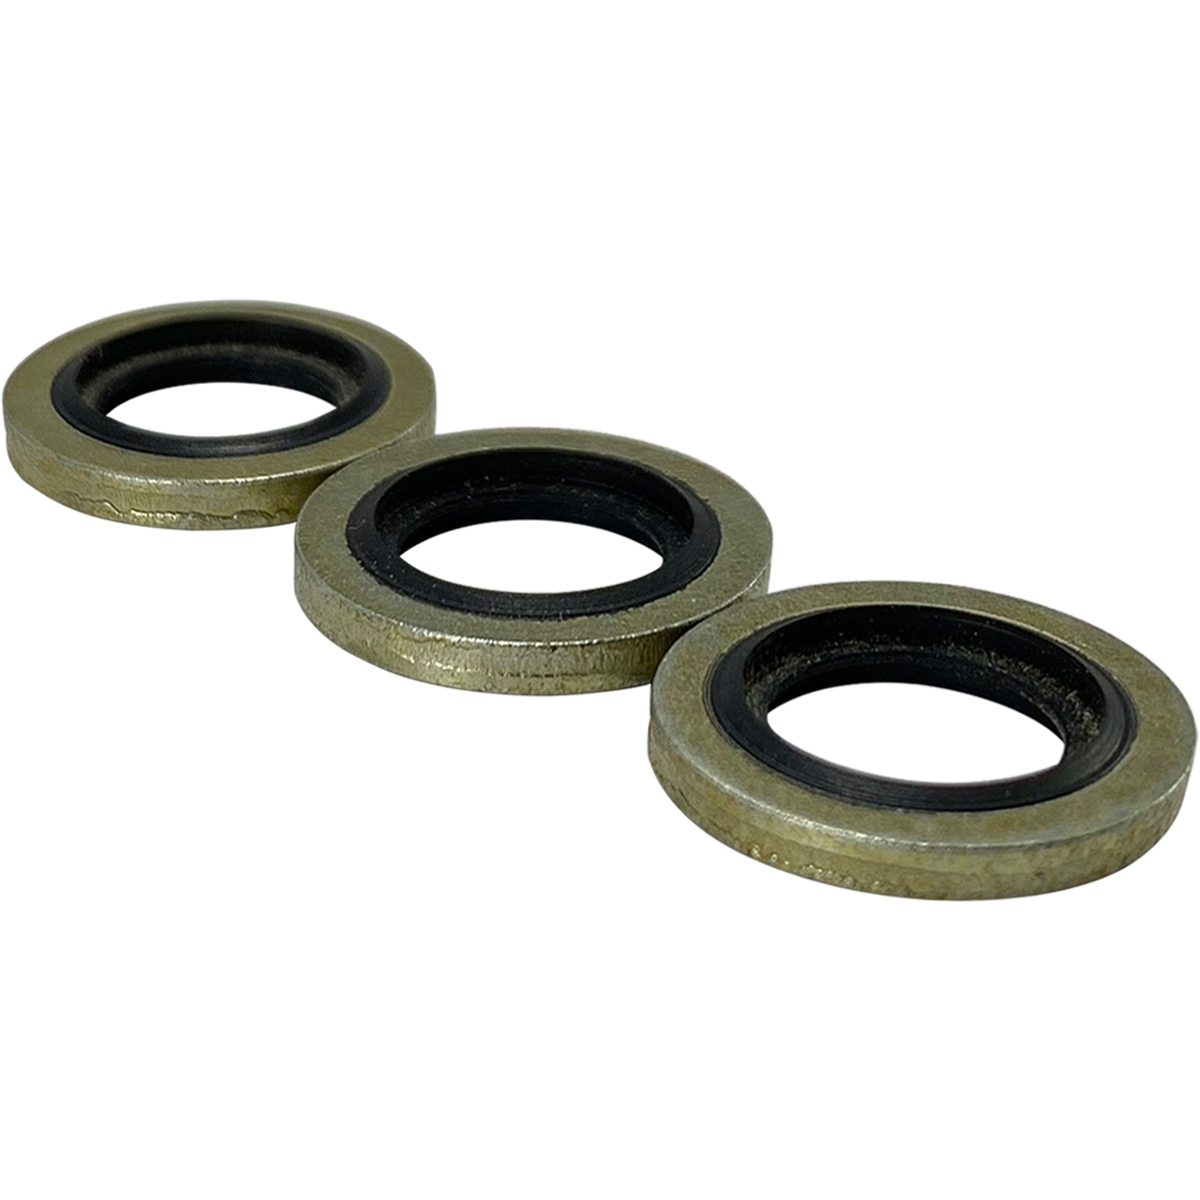 Zinc Plated, Bonded Sealing Washers, available in various diameters at competitive prices.